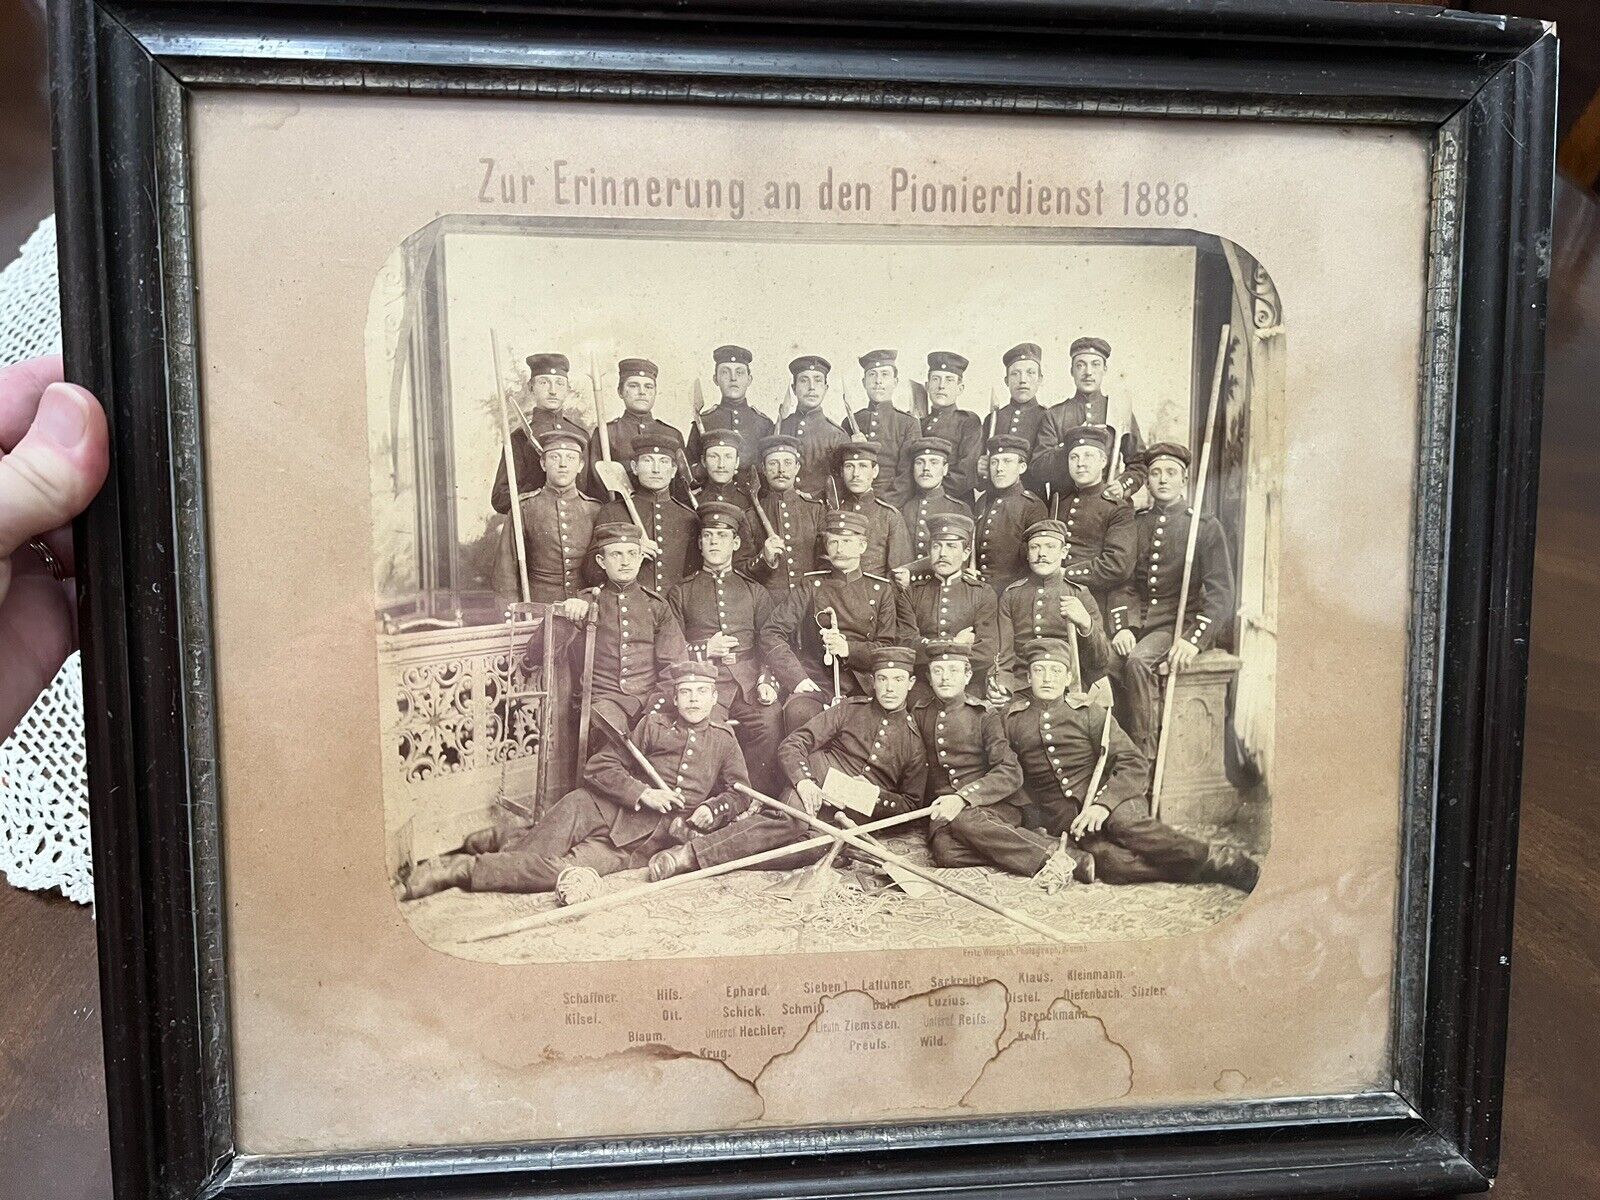 Orig.German Infantry Photo VERY RARE To Commemorate The Pioneer Service Of 1888